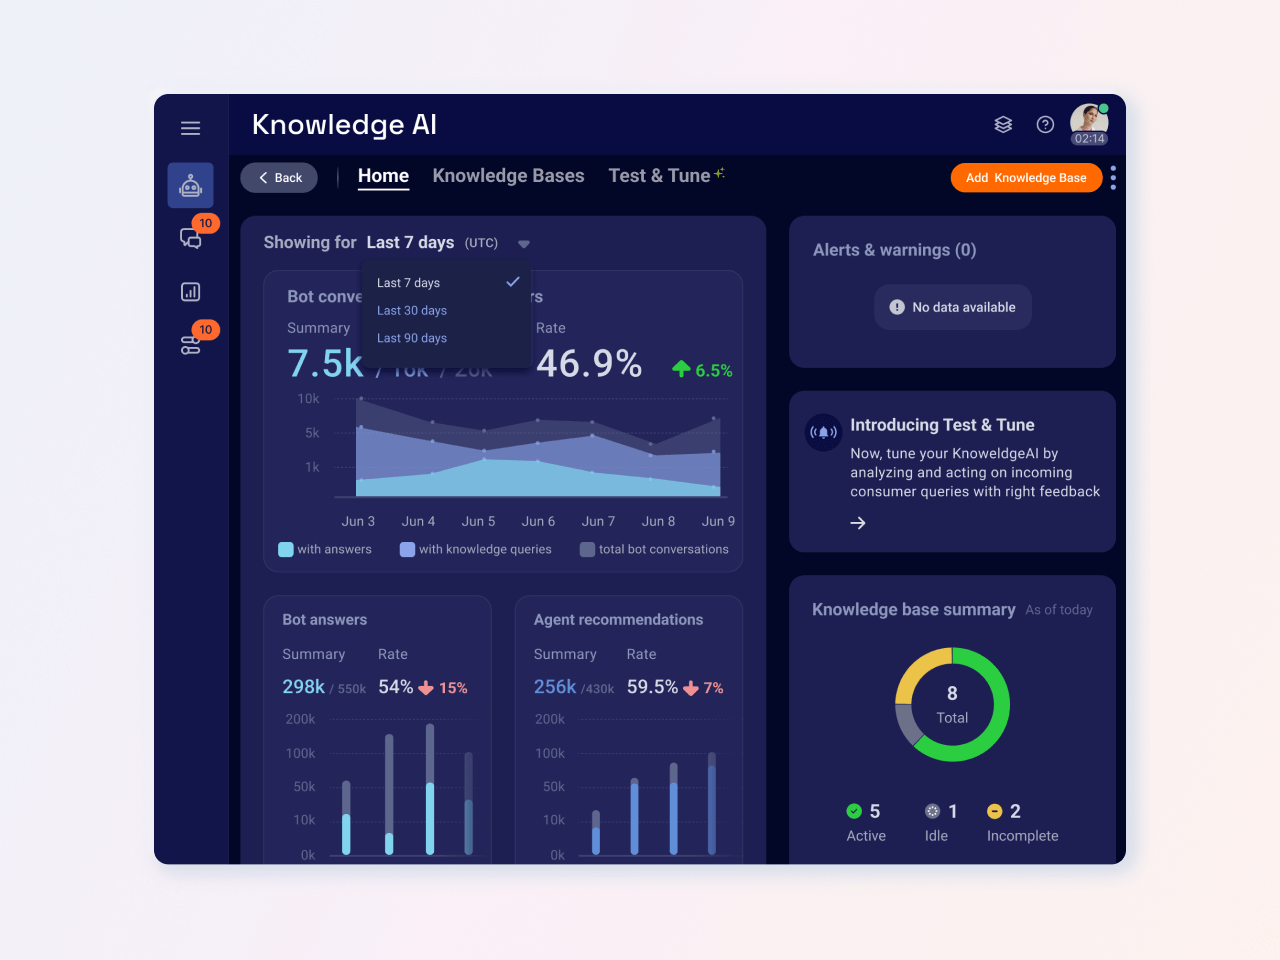 KnowledgeAI dashboard, which takes content data points from different providers so the most qualified agent or bot can respond